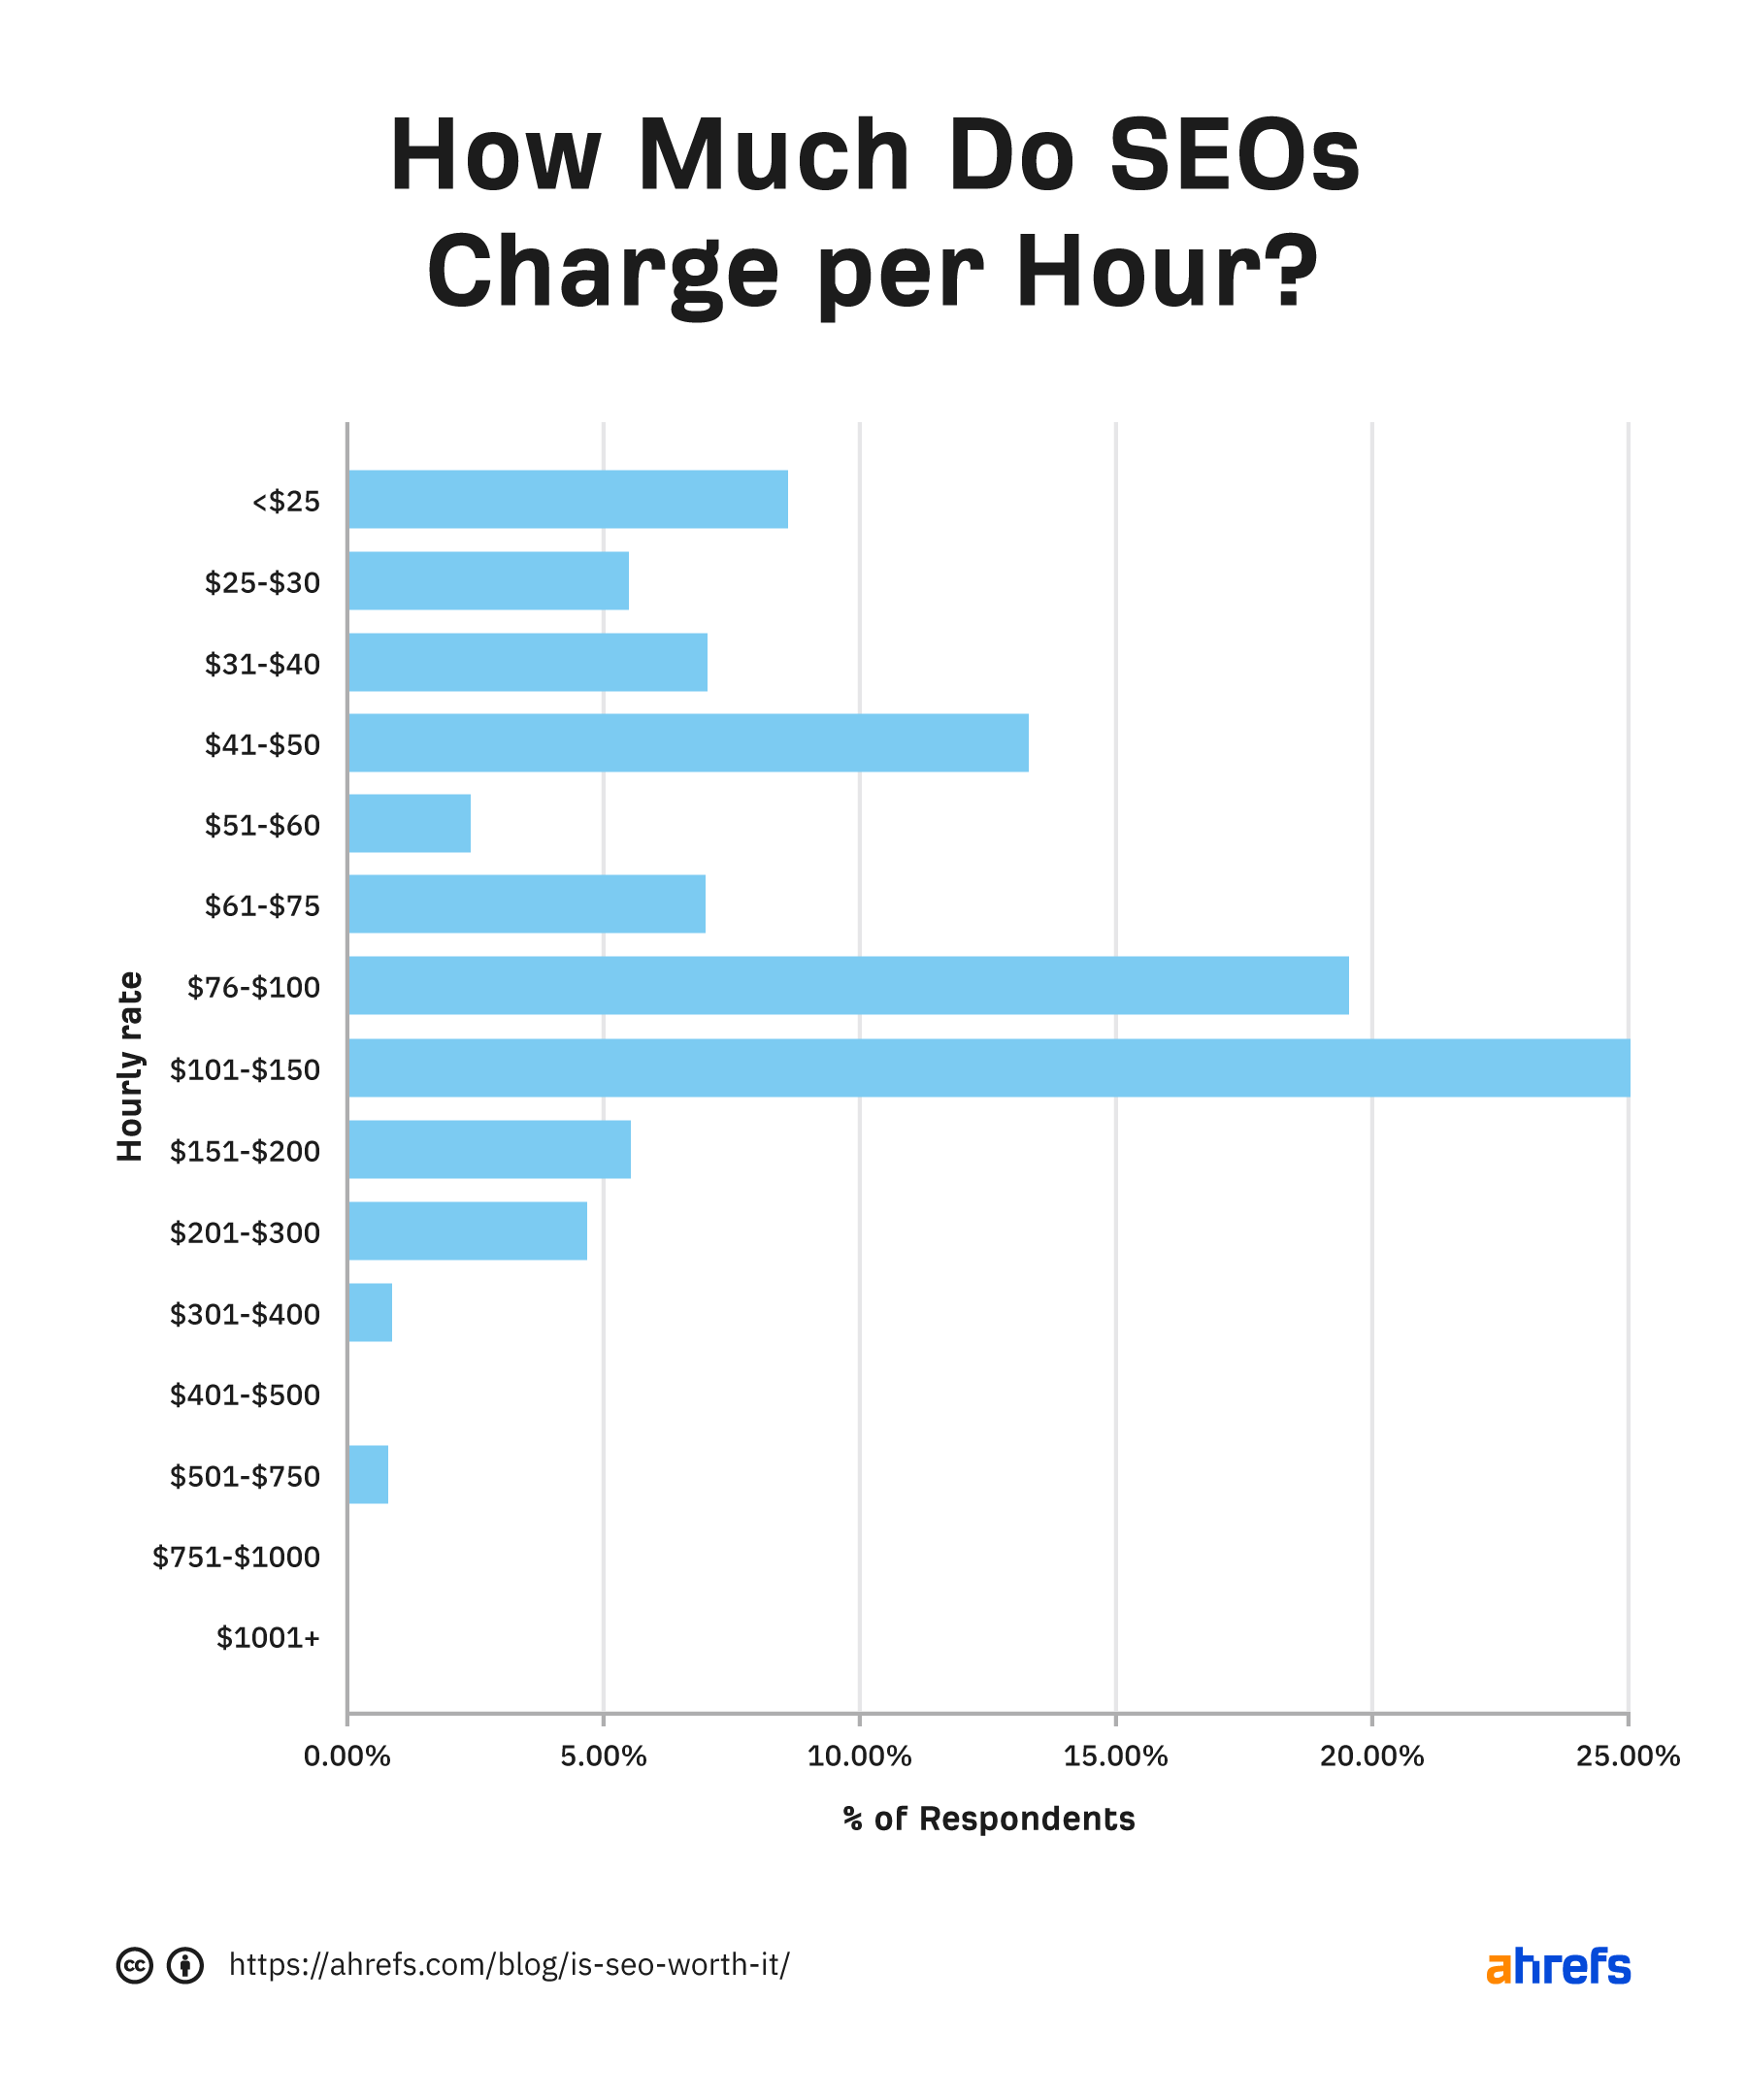 The bar chart showing most SEOs charges $ 76– $ 100 and $ 101– $ 150 per hour